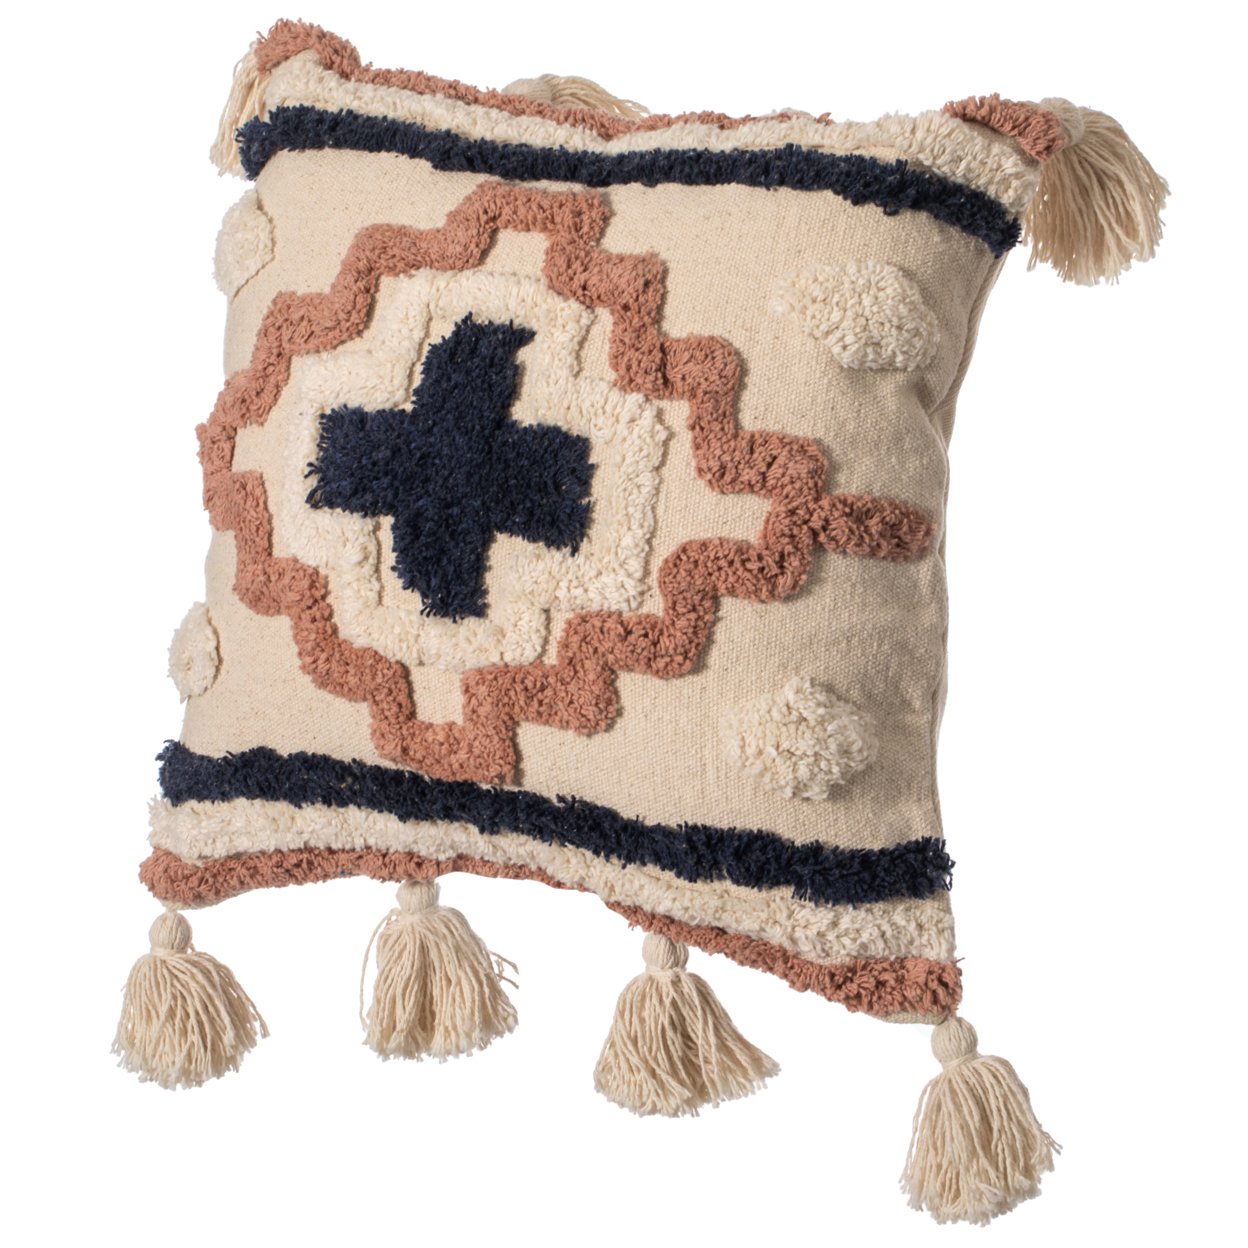 16 Handwoven Cotton Throw Pillow Cover With Tufted Designs And Side Tassels - Border With Cushion